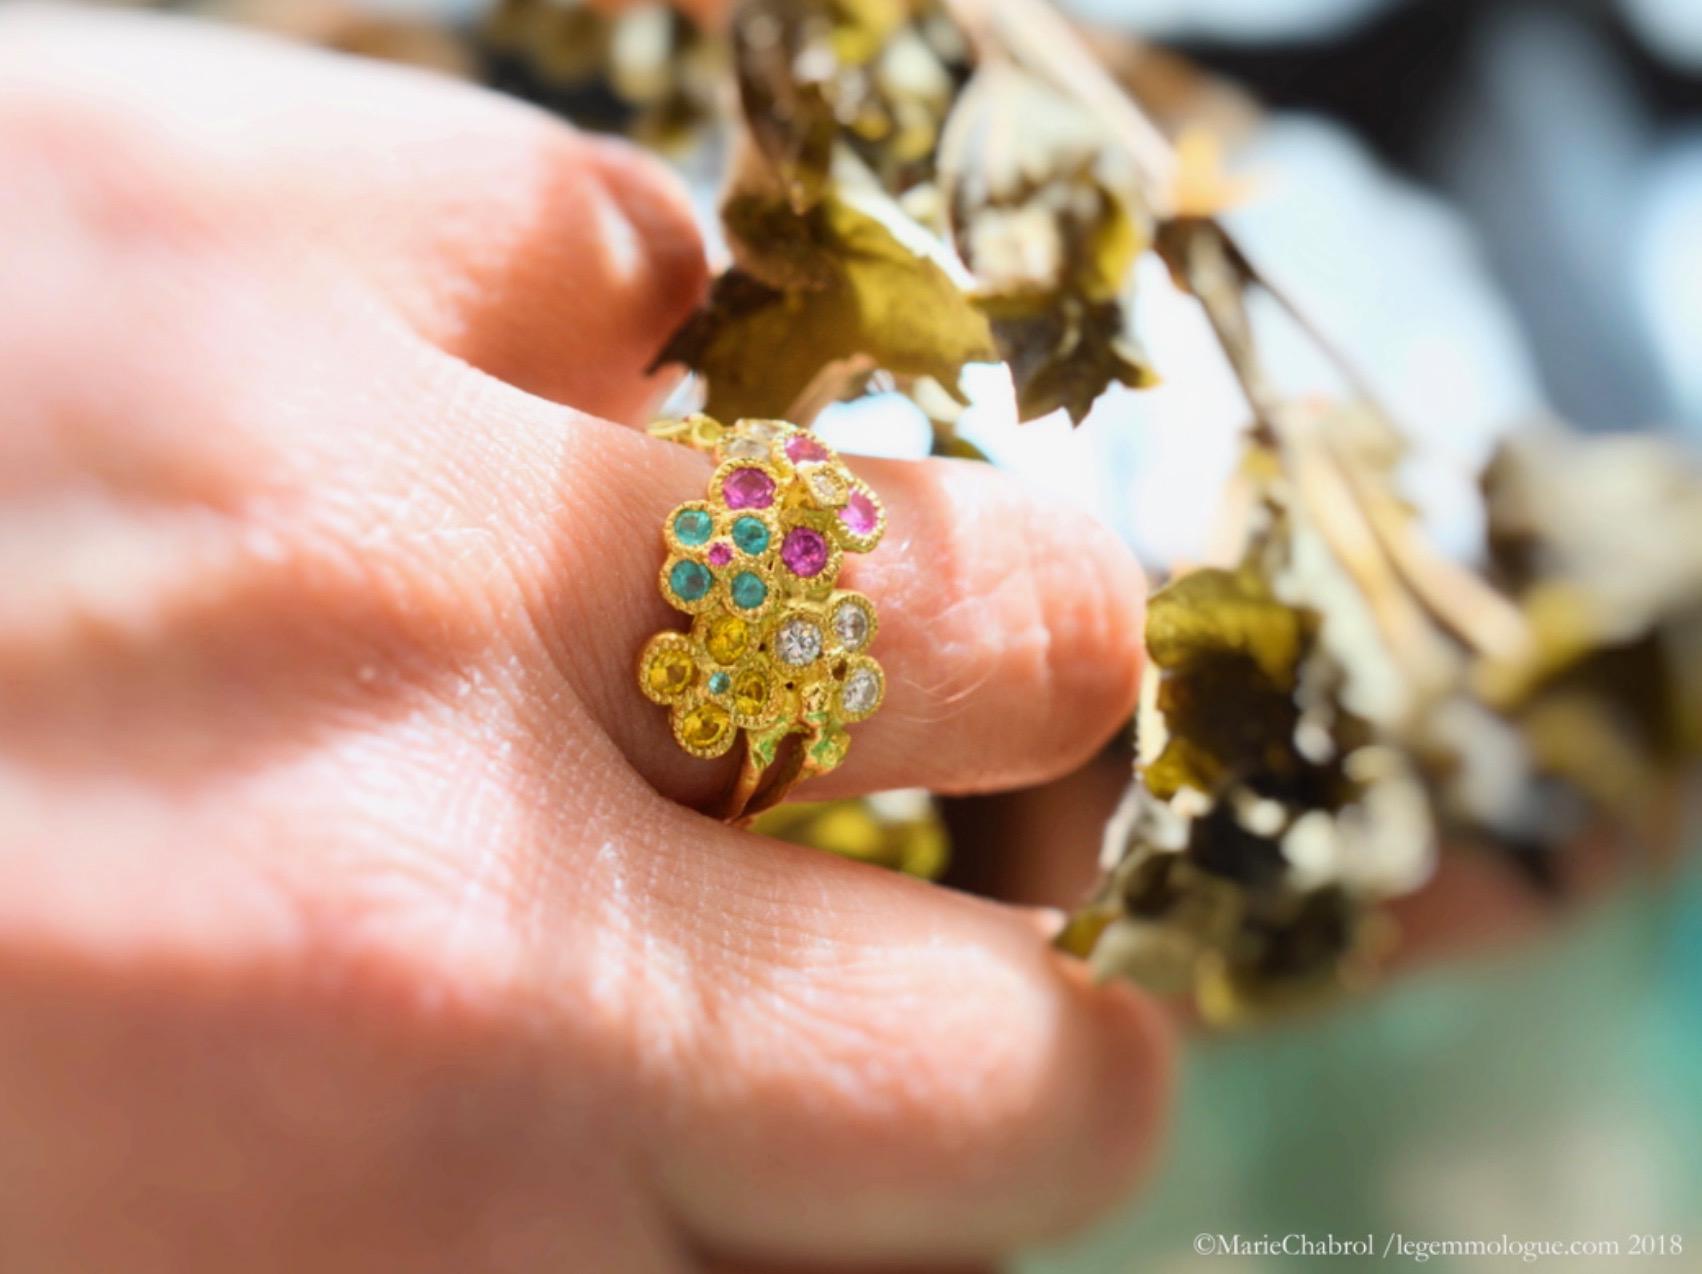 This ring is handmade in 18K yellow gold. Chiseled flowers with a matt and shiny polish. It is set with diamonds of approximately 0.17 carat, yellow sapphires 0.31 ct approx. Tourmaline Paraiba 0.9 carat approx. and pink sapphires 0.19 carat approx.